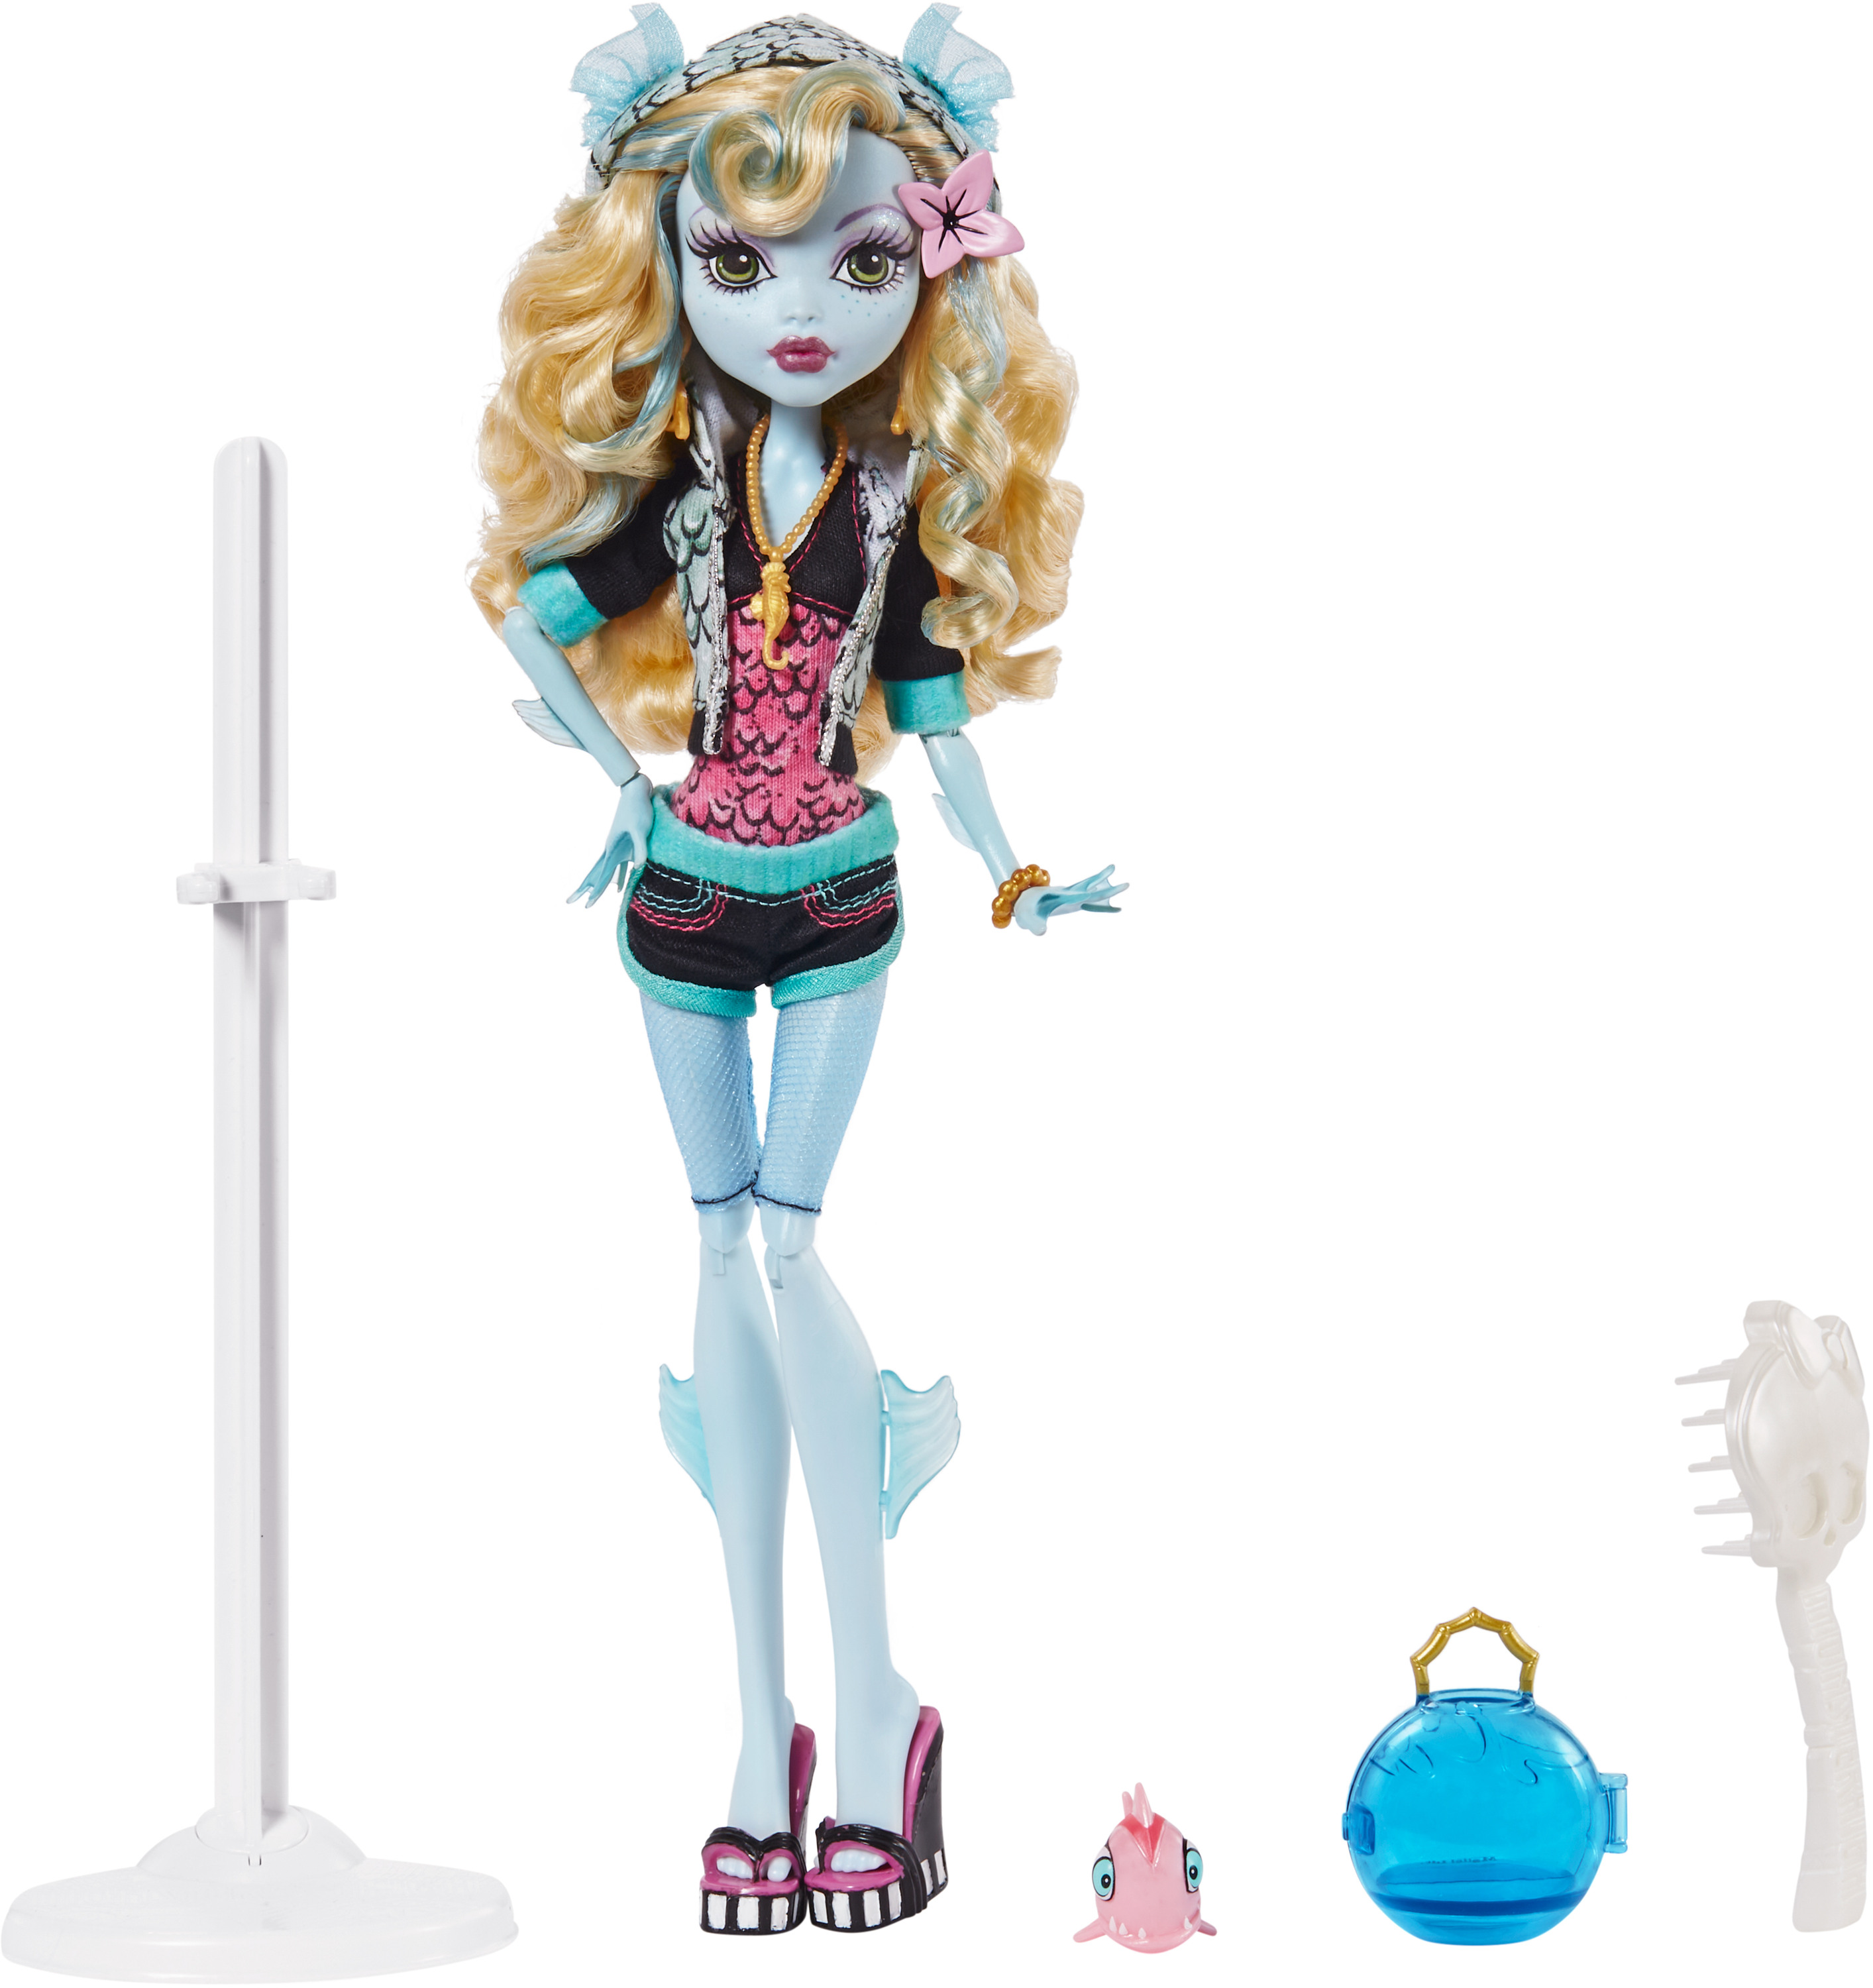 Monster High Lagoona Blue Doll, Collectible Reproduction in Original Look with Diary & Doll Stand - image 5 of 6